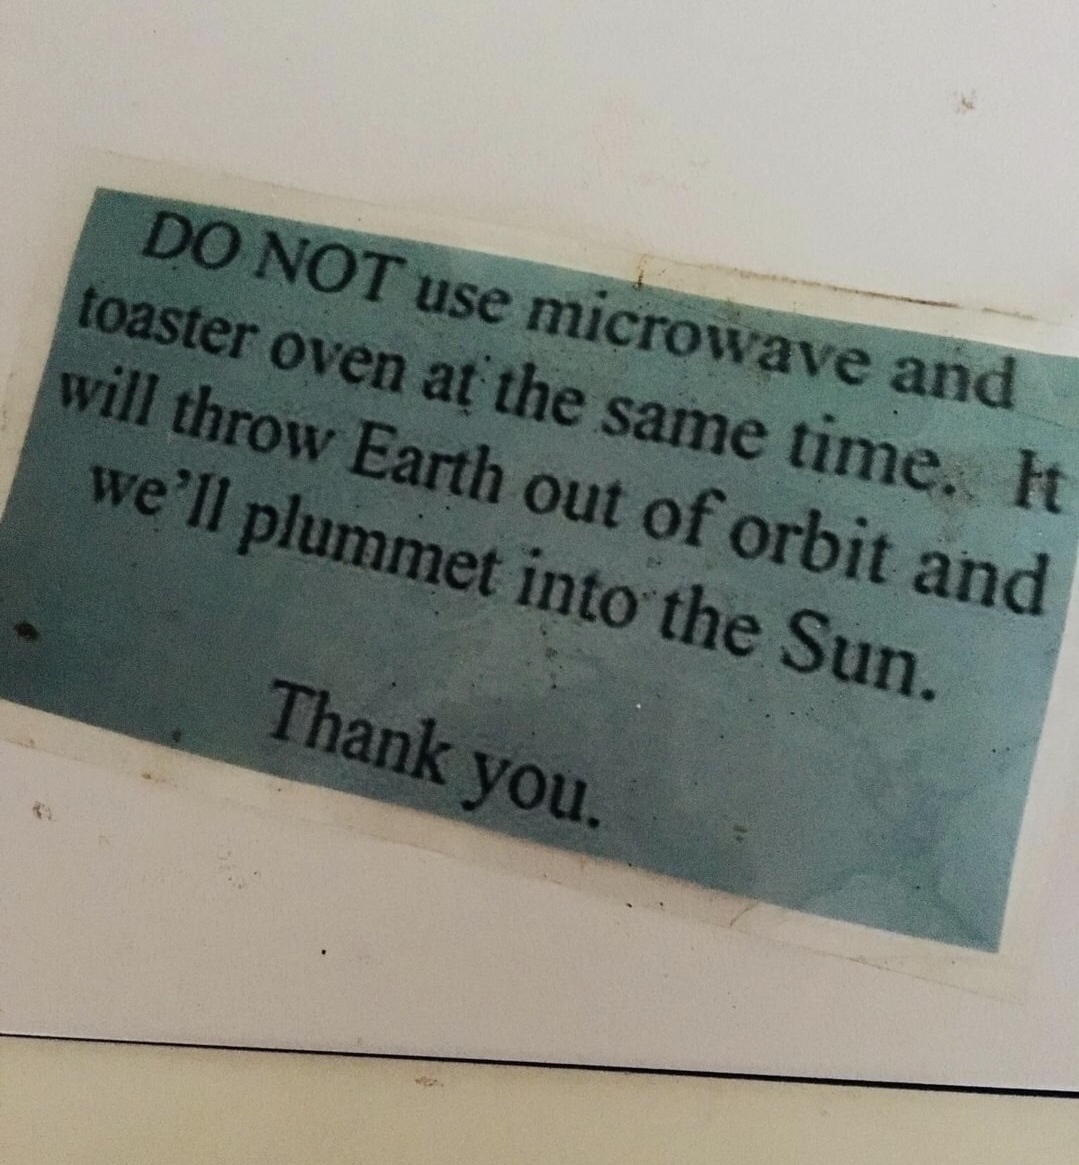 commemorative plaque - Do Not use microwave and toaster oven at the same time. It will throw Earth out of orbit and we'll plummet into the Sun. Thank you.